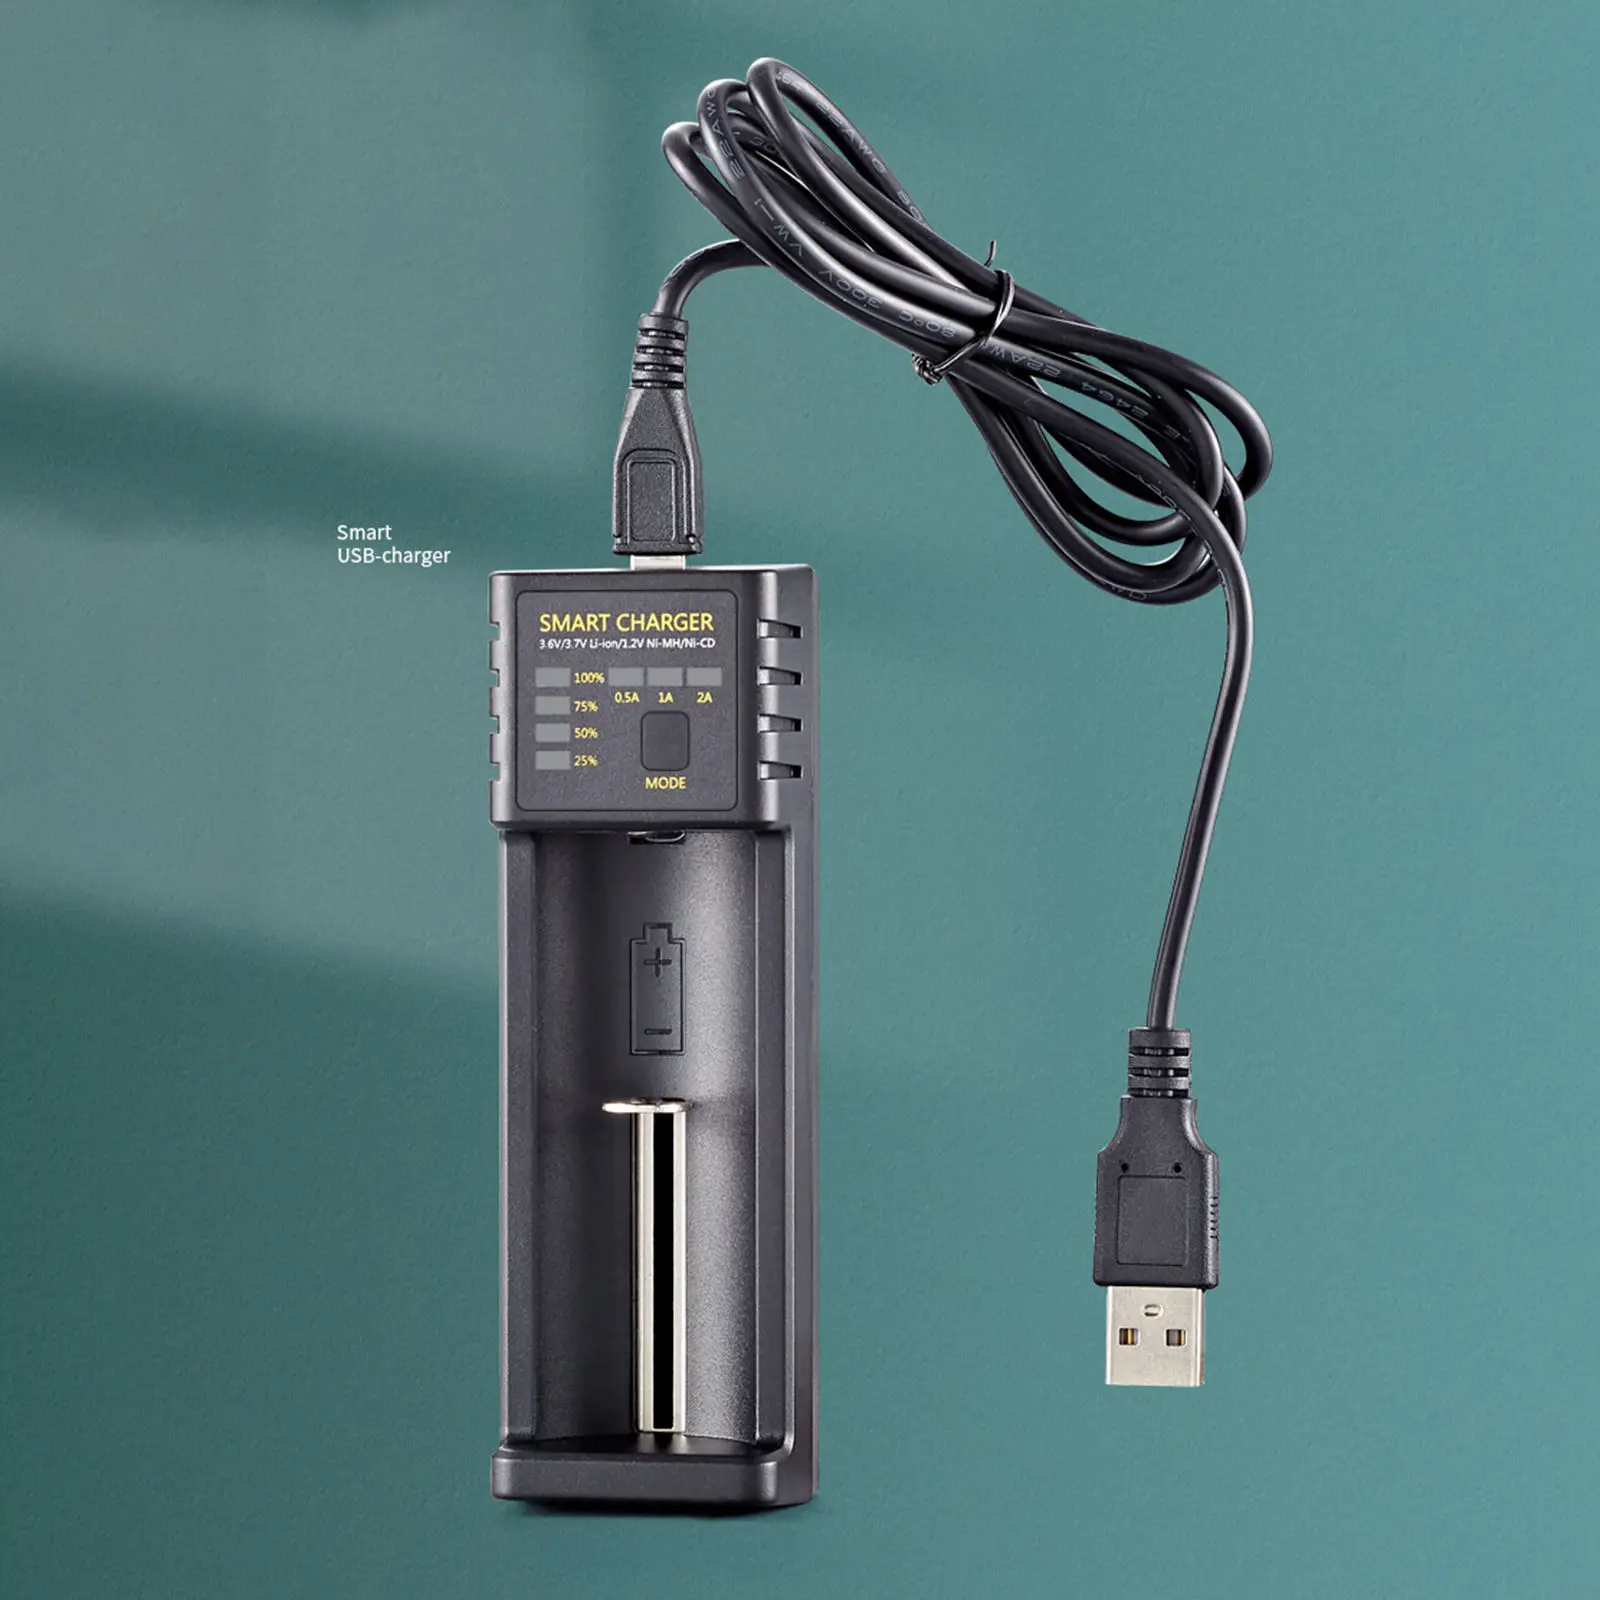 Universal 18650 Battery Charger 3.6V/3.7V LI-Ion Battery with USB Port 16340/17500/17670 One Slot 10400/14500/14650 Lithium